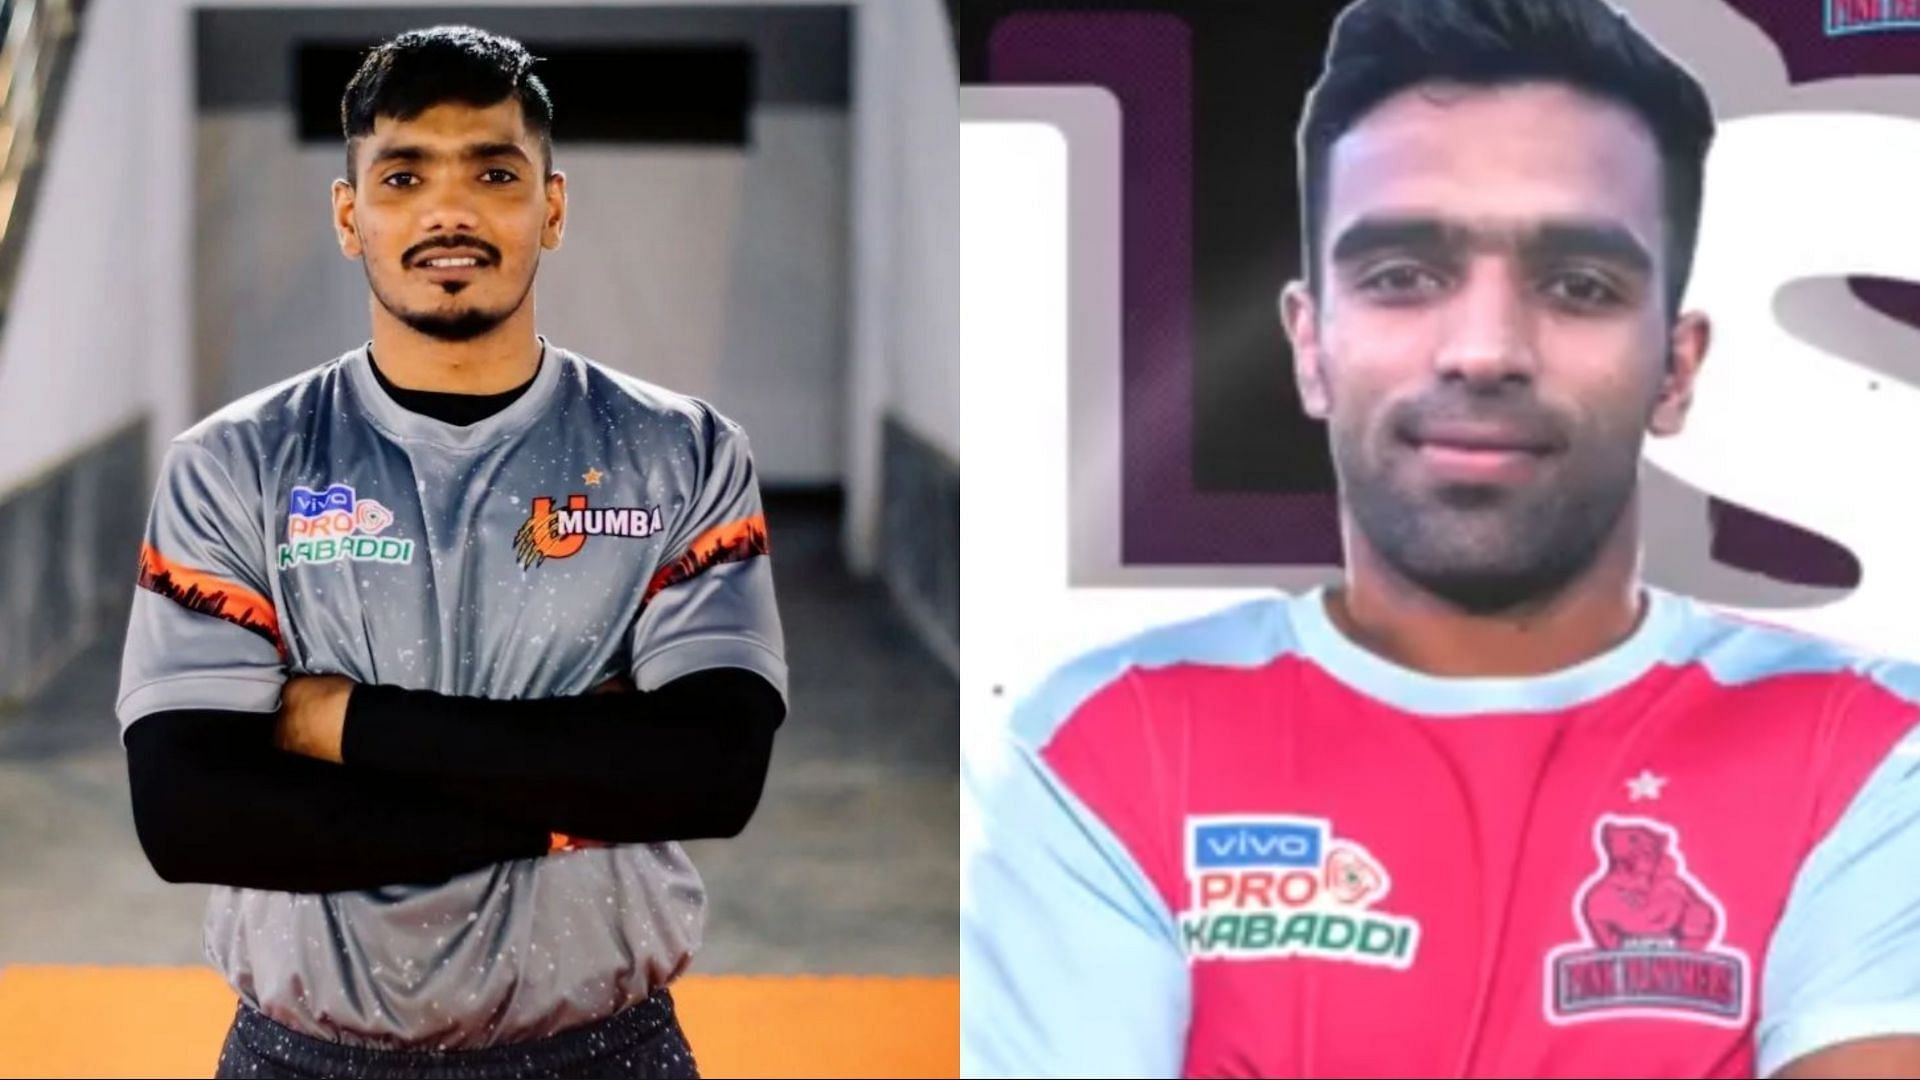 Pro Kabaddi 2022 will feature some new faces (Image: Instagram)